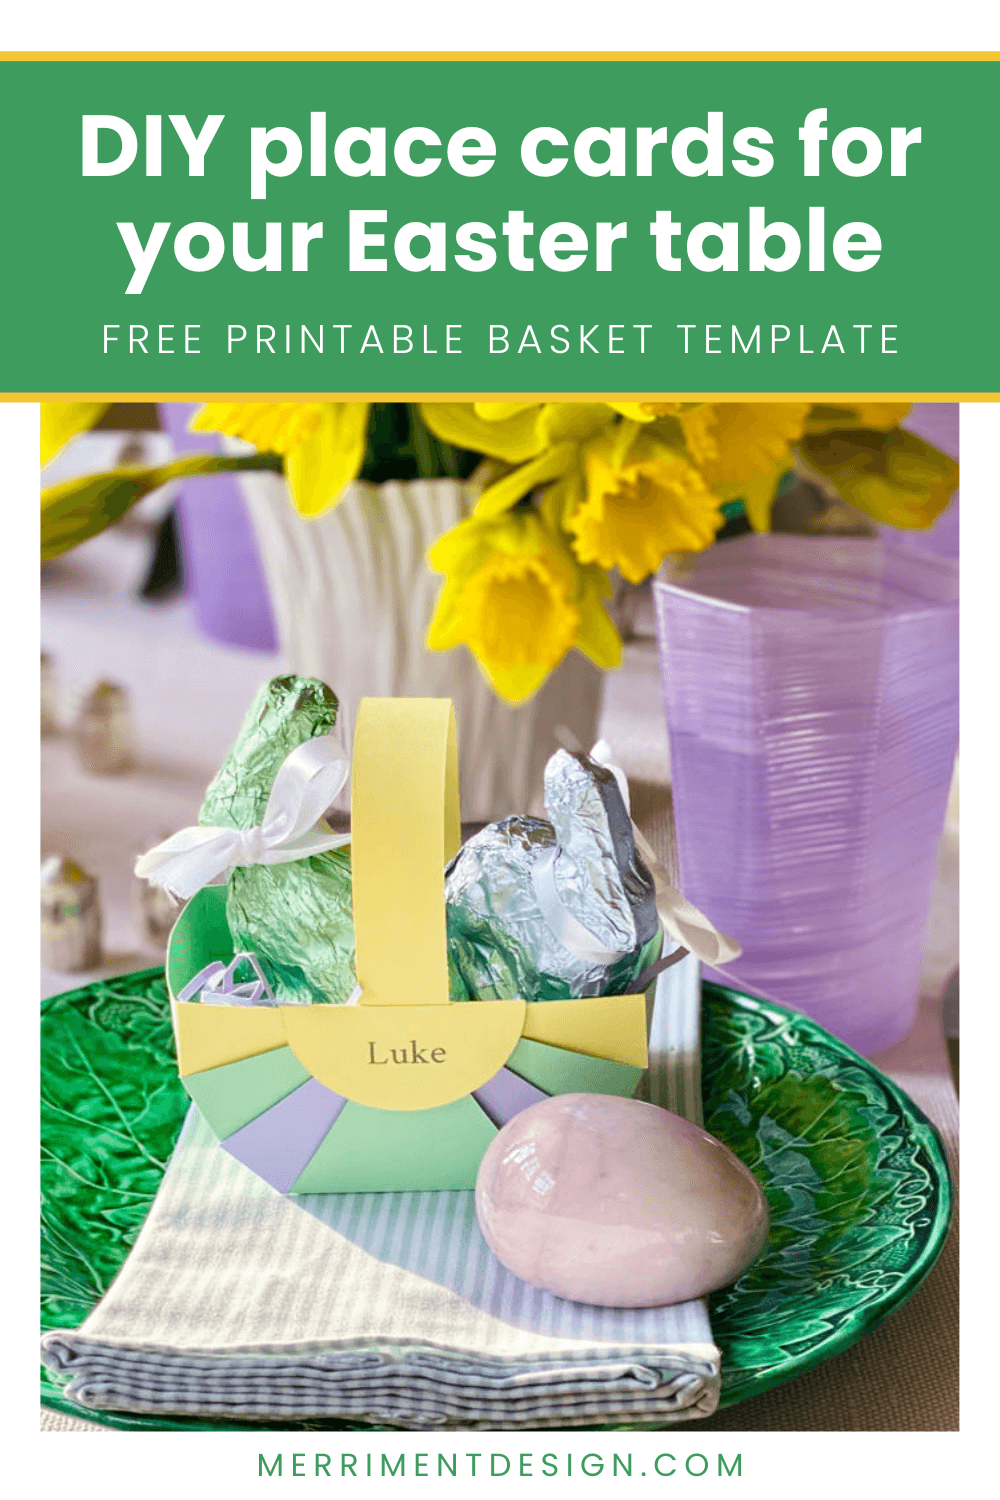 DIY place cards for your Easter table